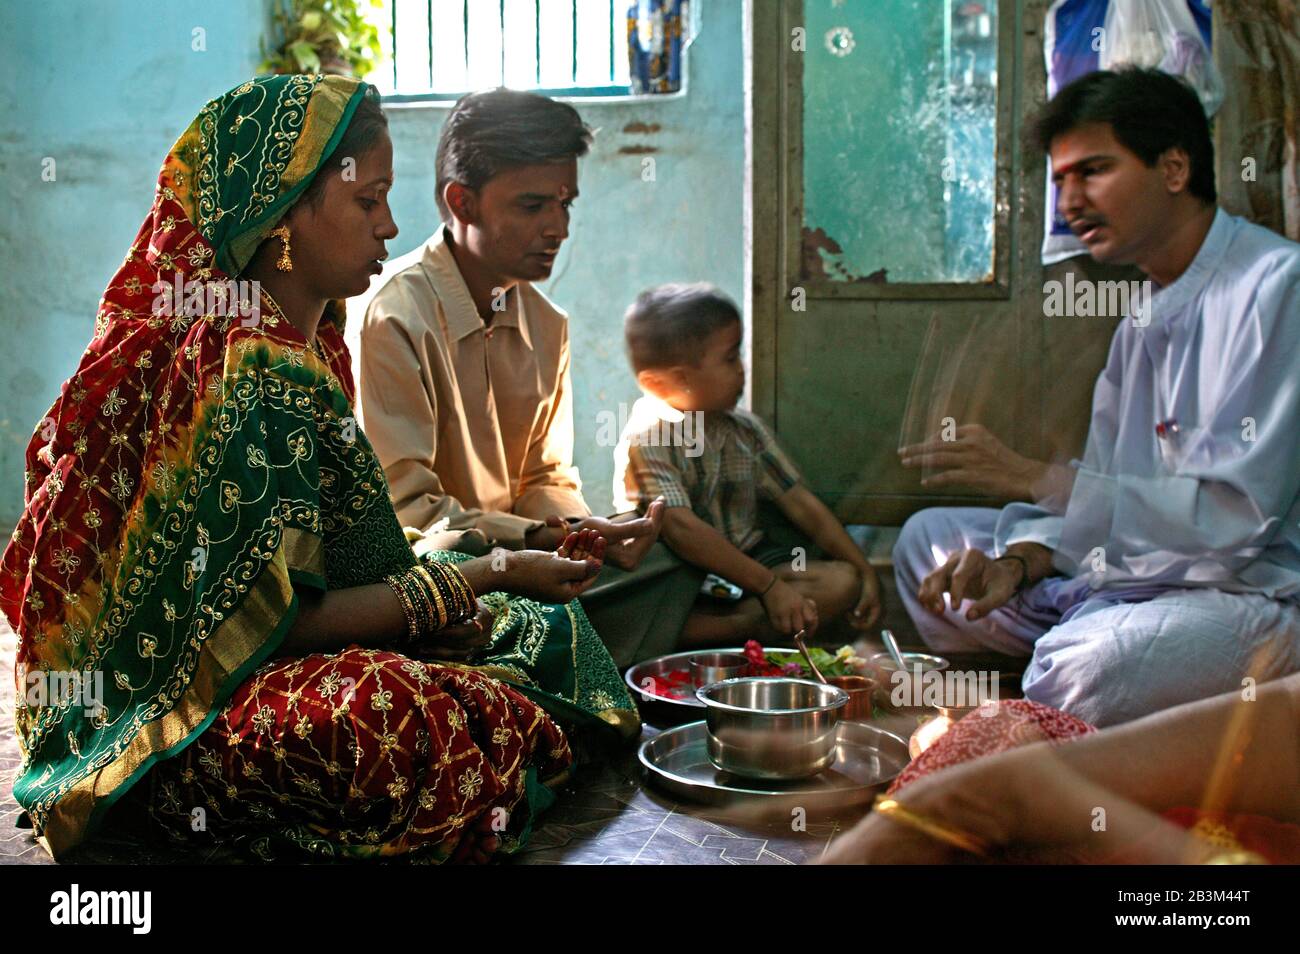 People performing pooja during India, Asia Stock Photo